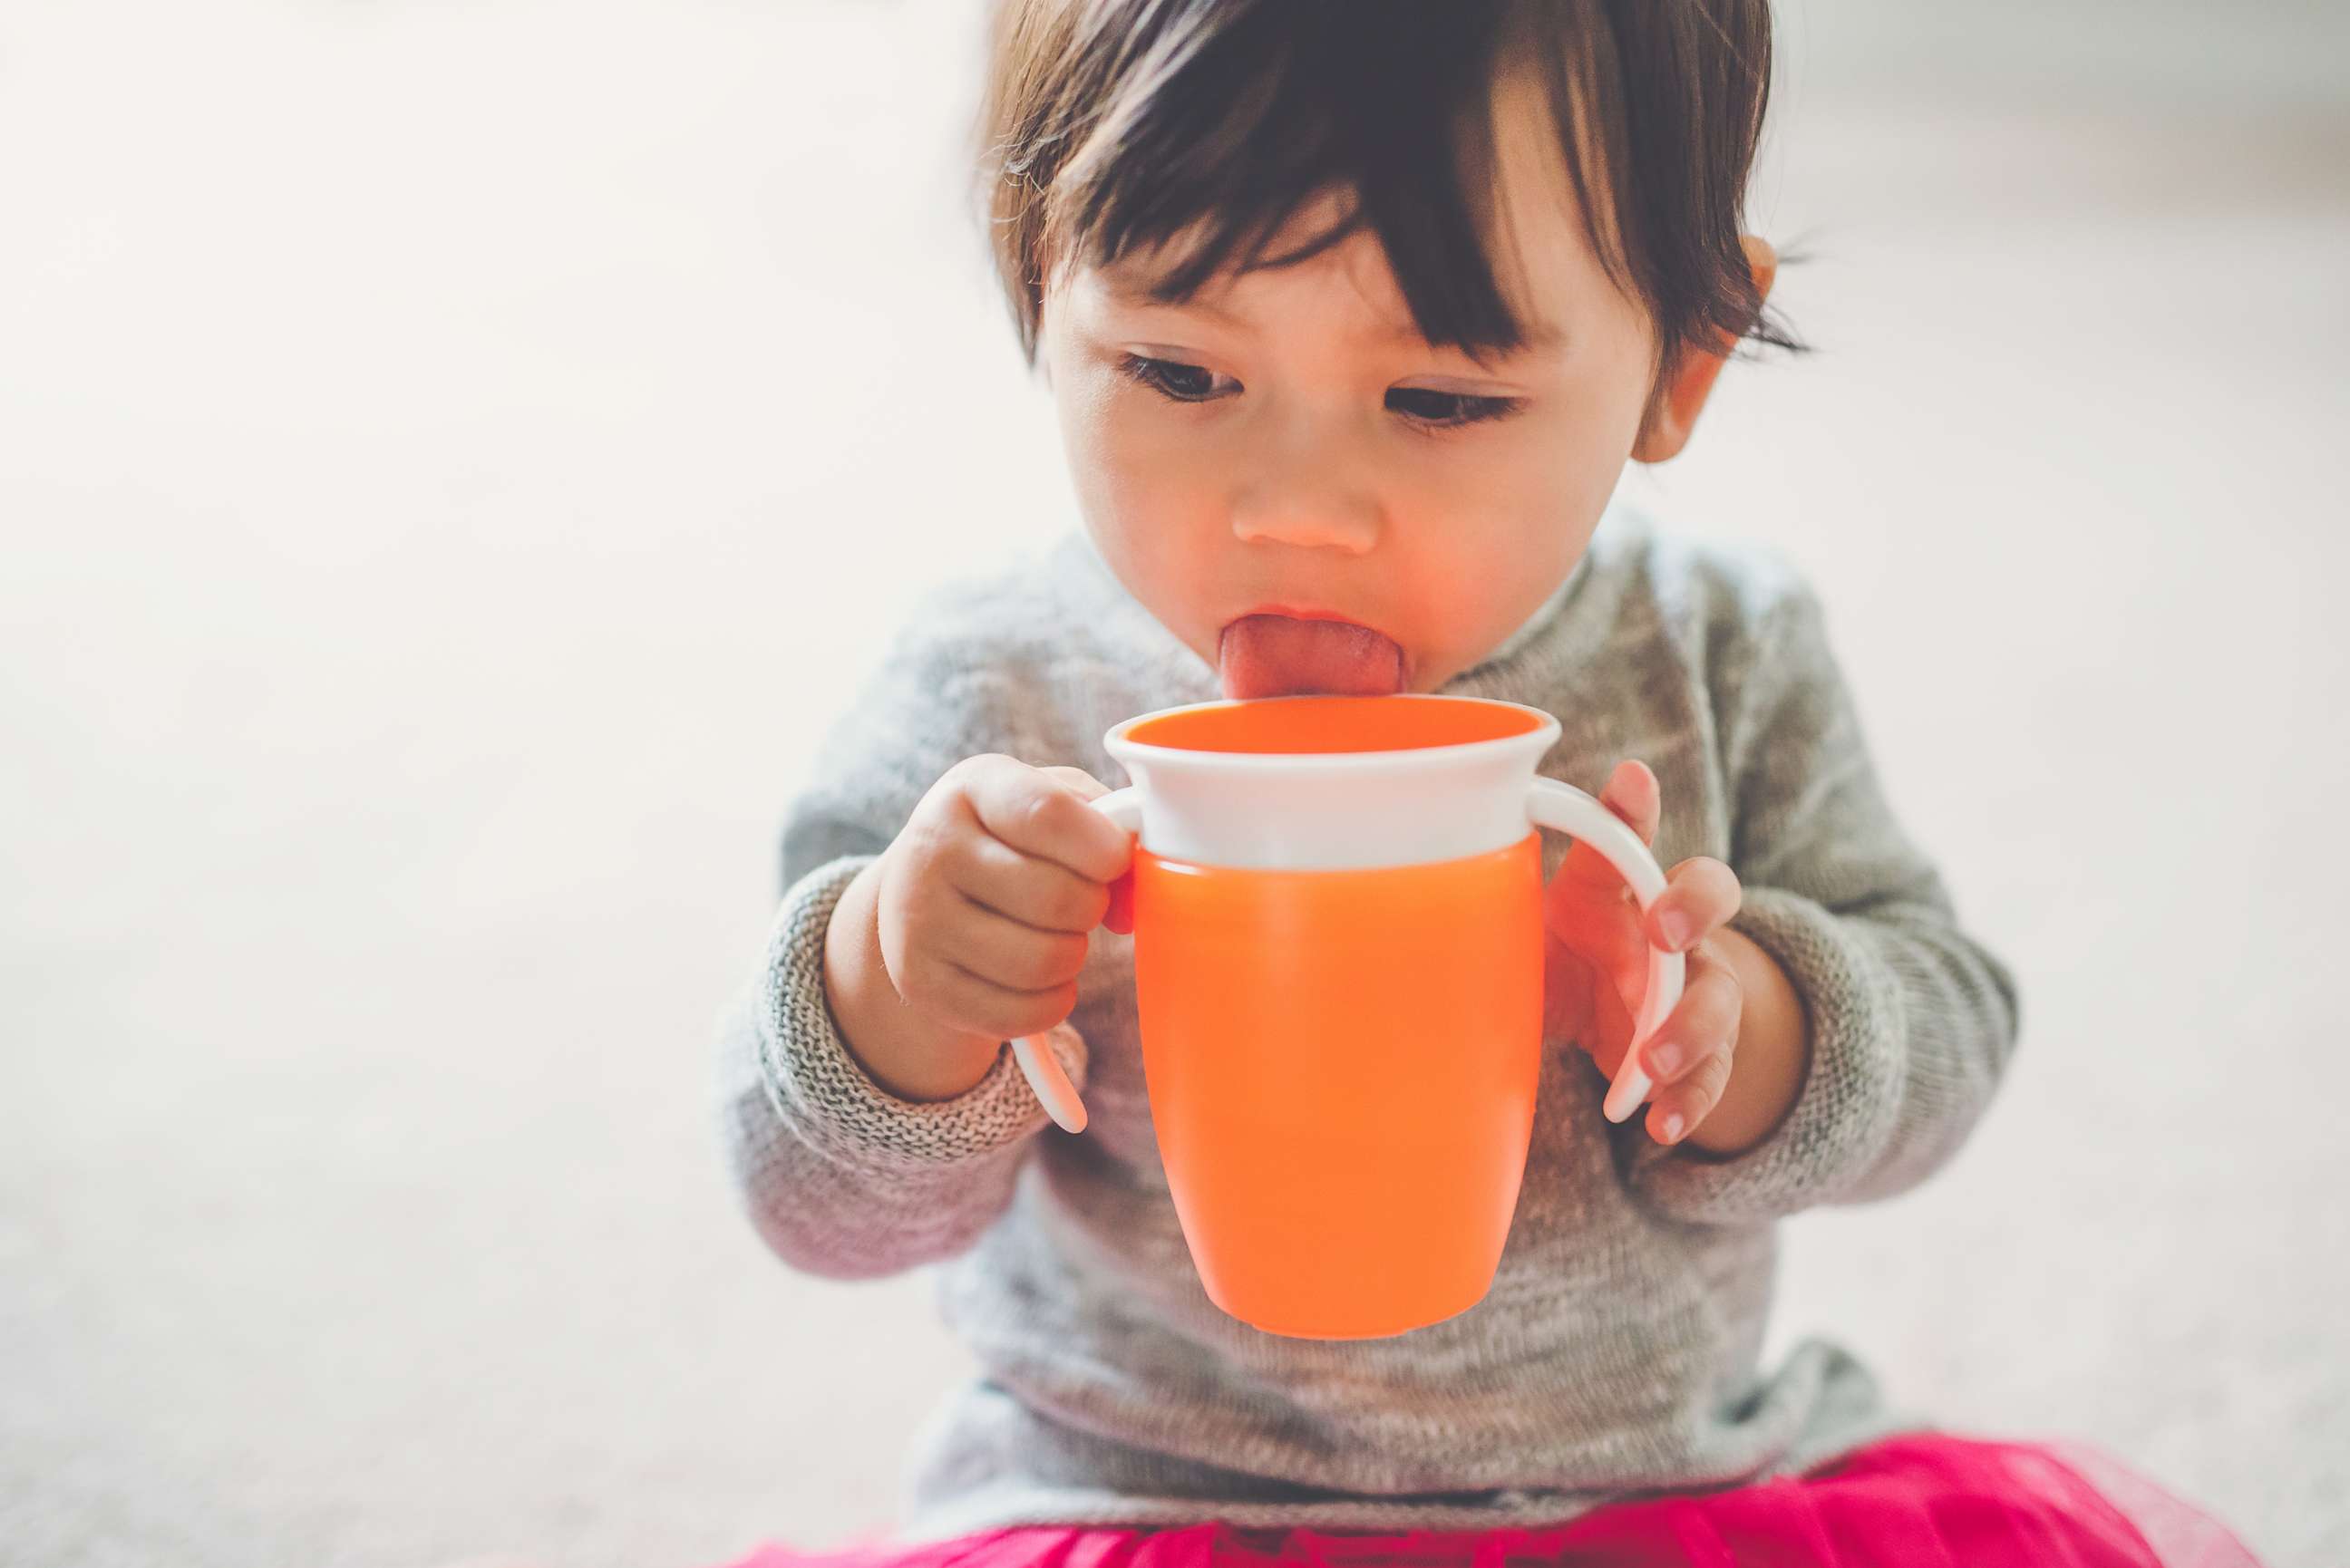 PHOTO: A toddler girl drinks from her sippy cup in this undated stock photo.